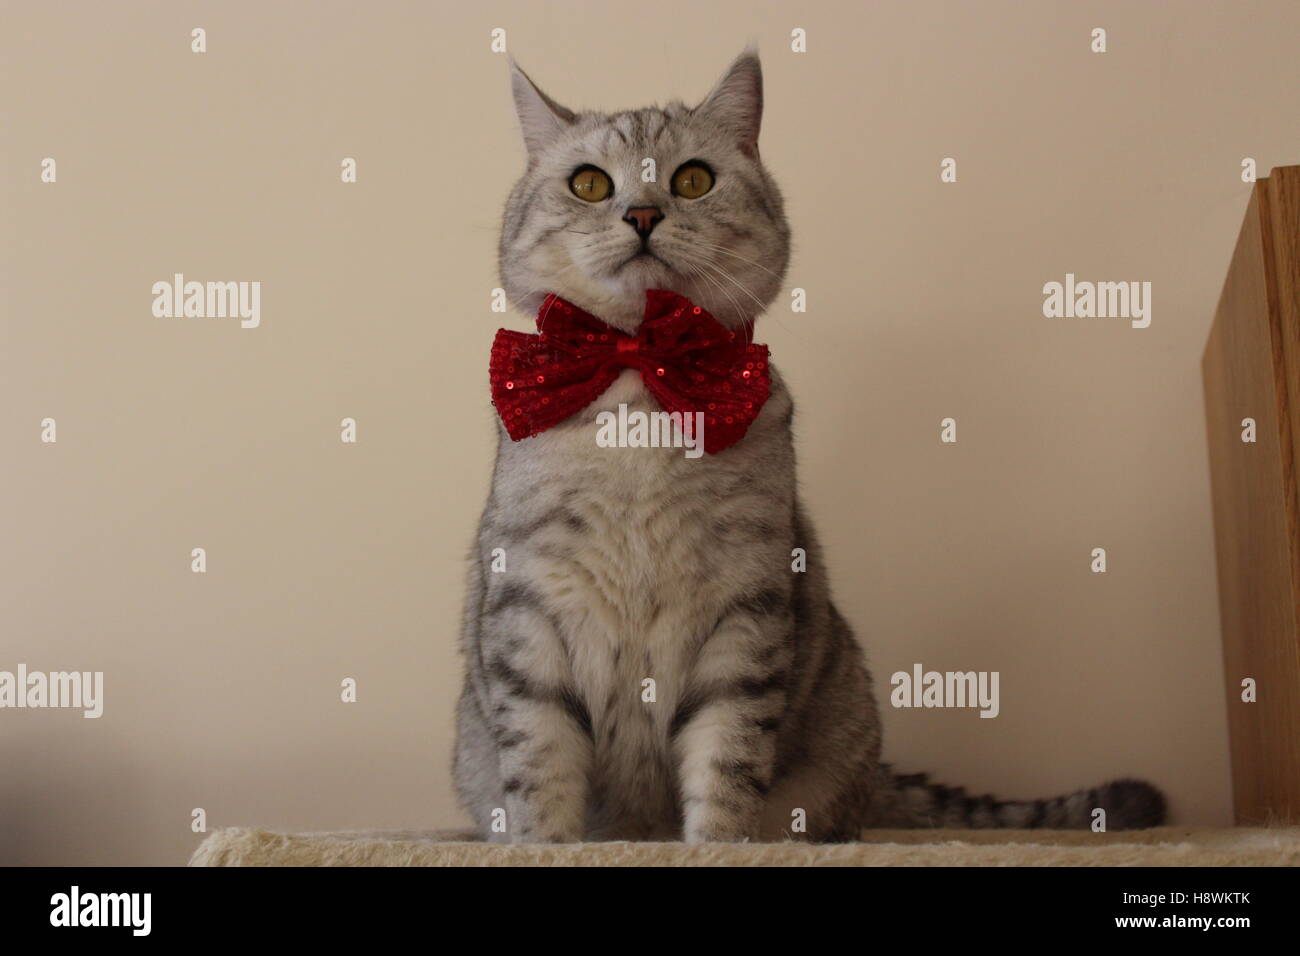 British Shorthair cat in red bow tie Stock Photo